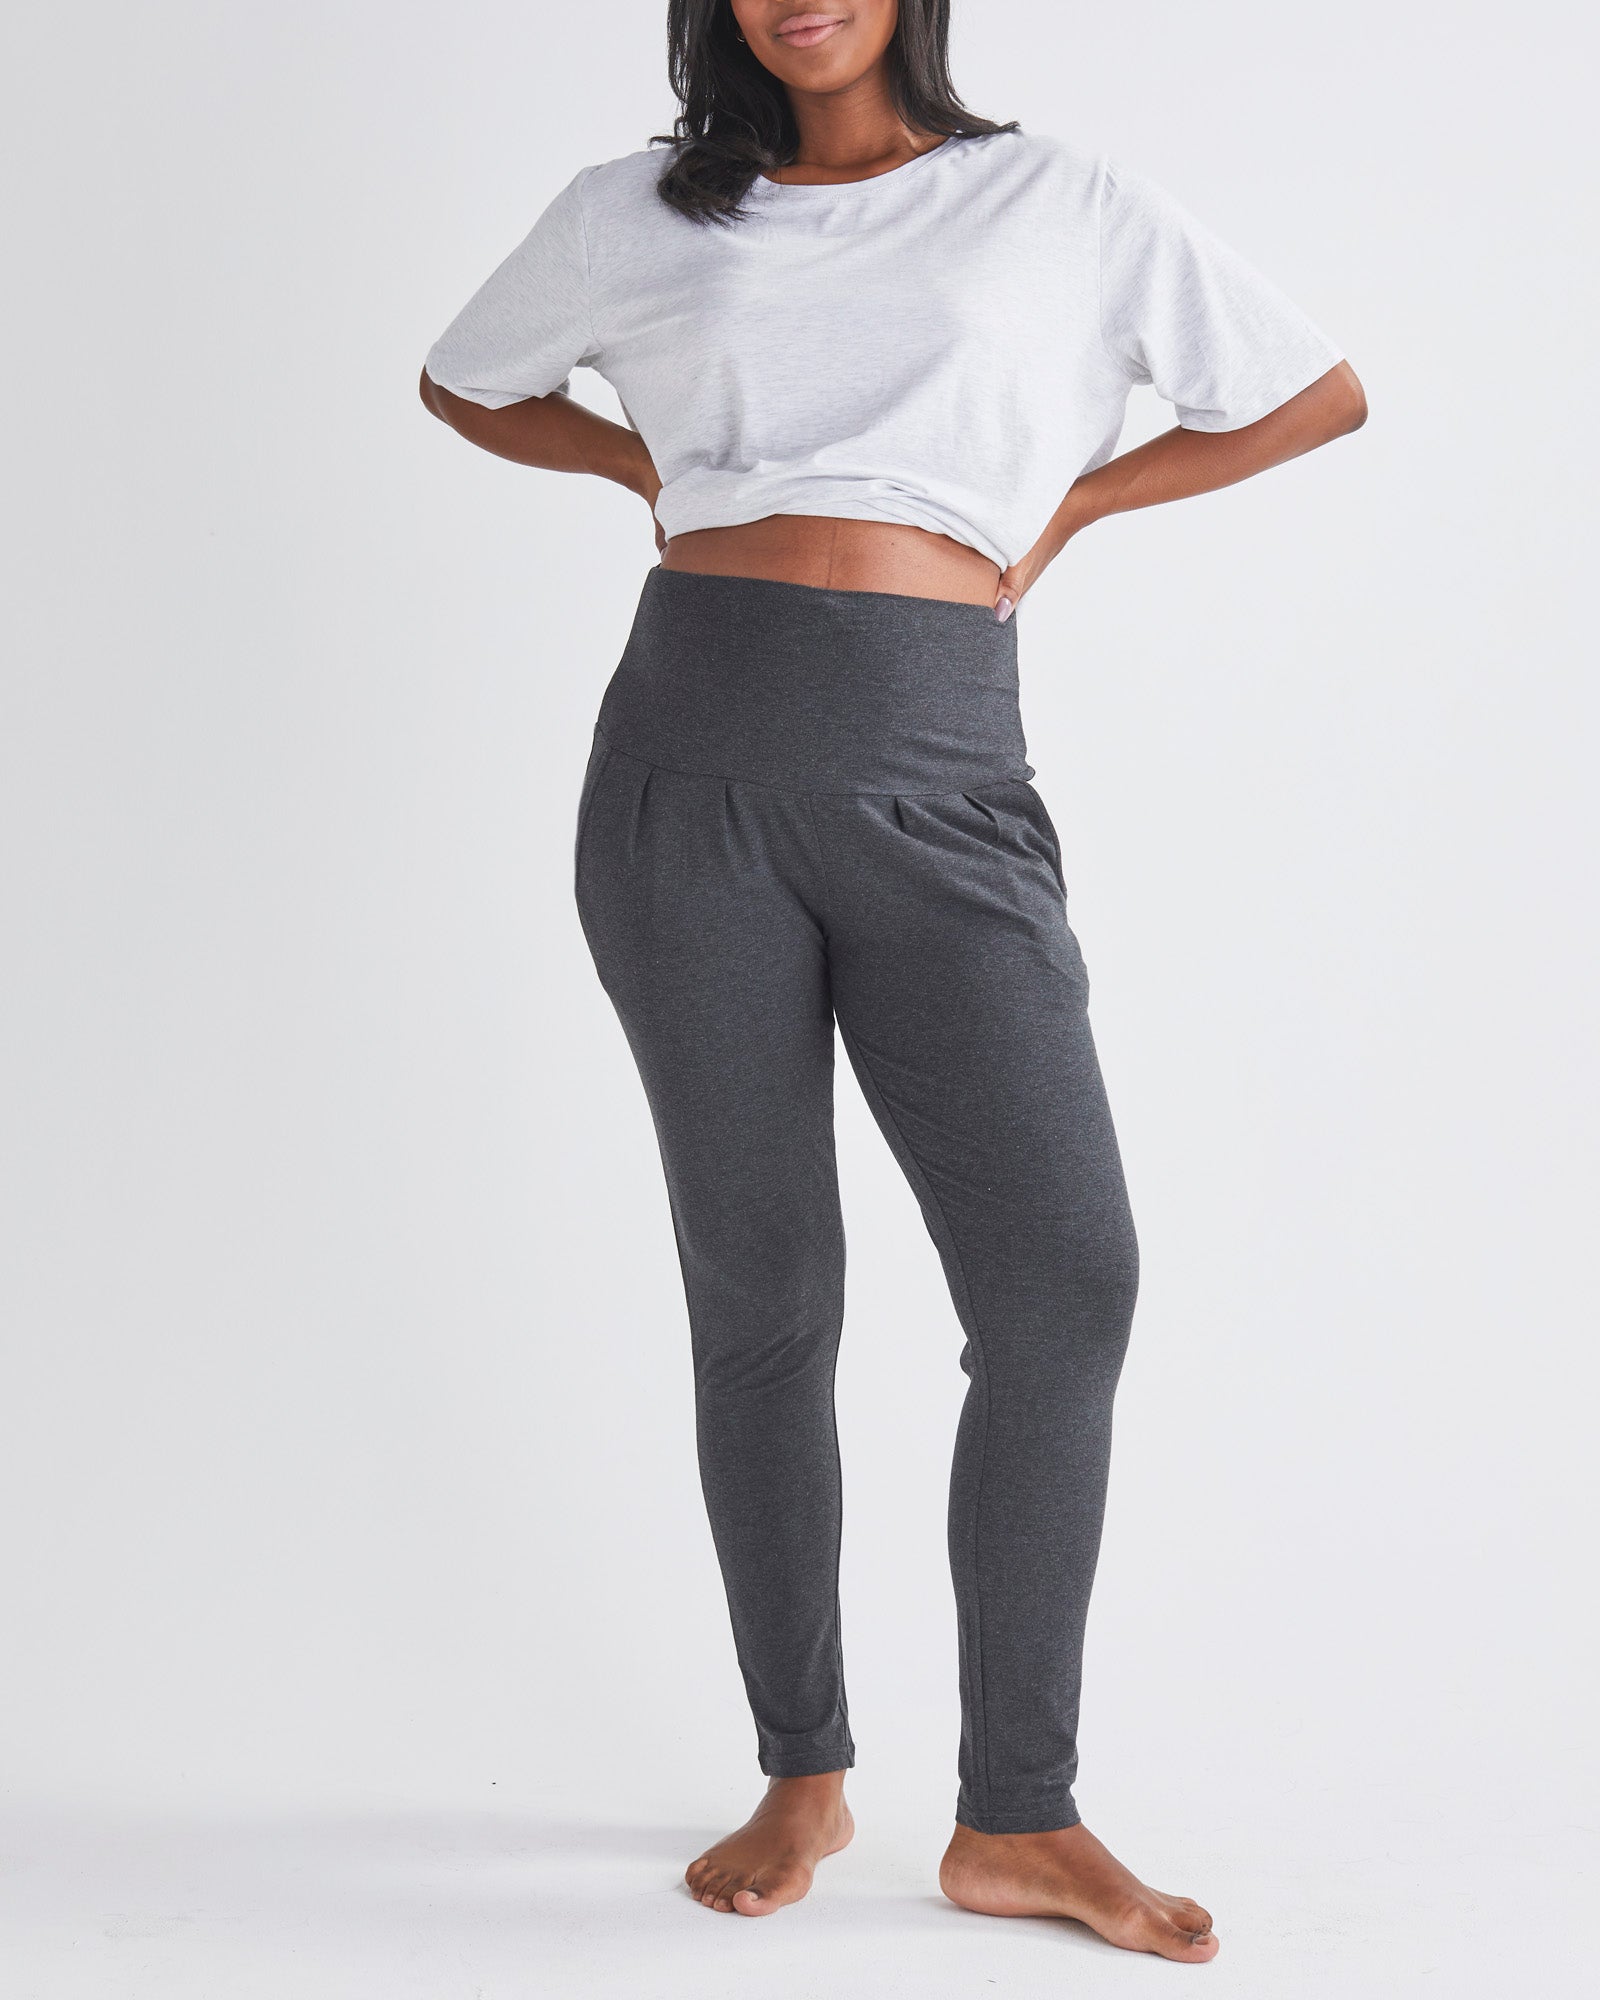 Main View - A Pregnannt Woman Wearing Eden Ultra Soft Maternity Lounge Pants in Charcoal from Angel Maternity.